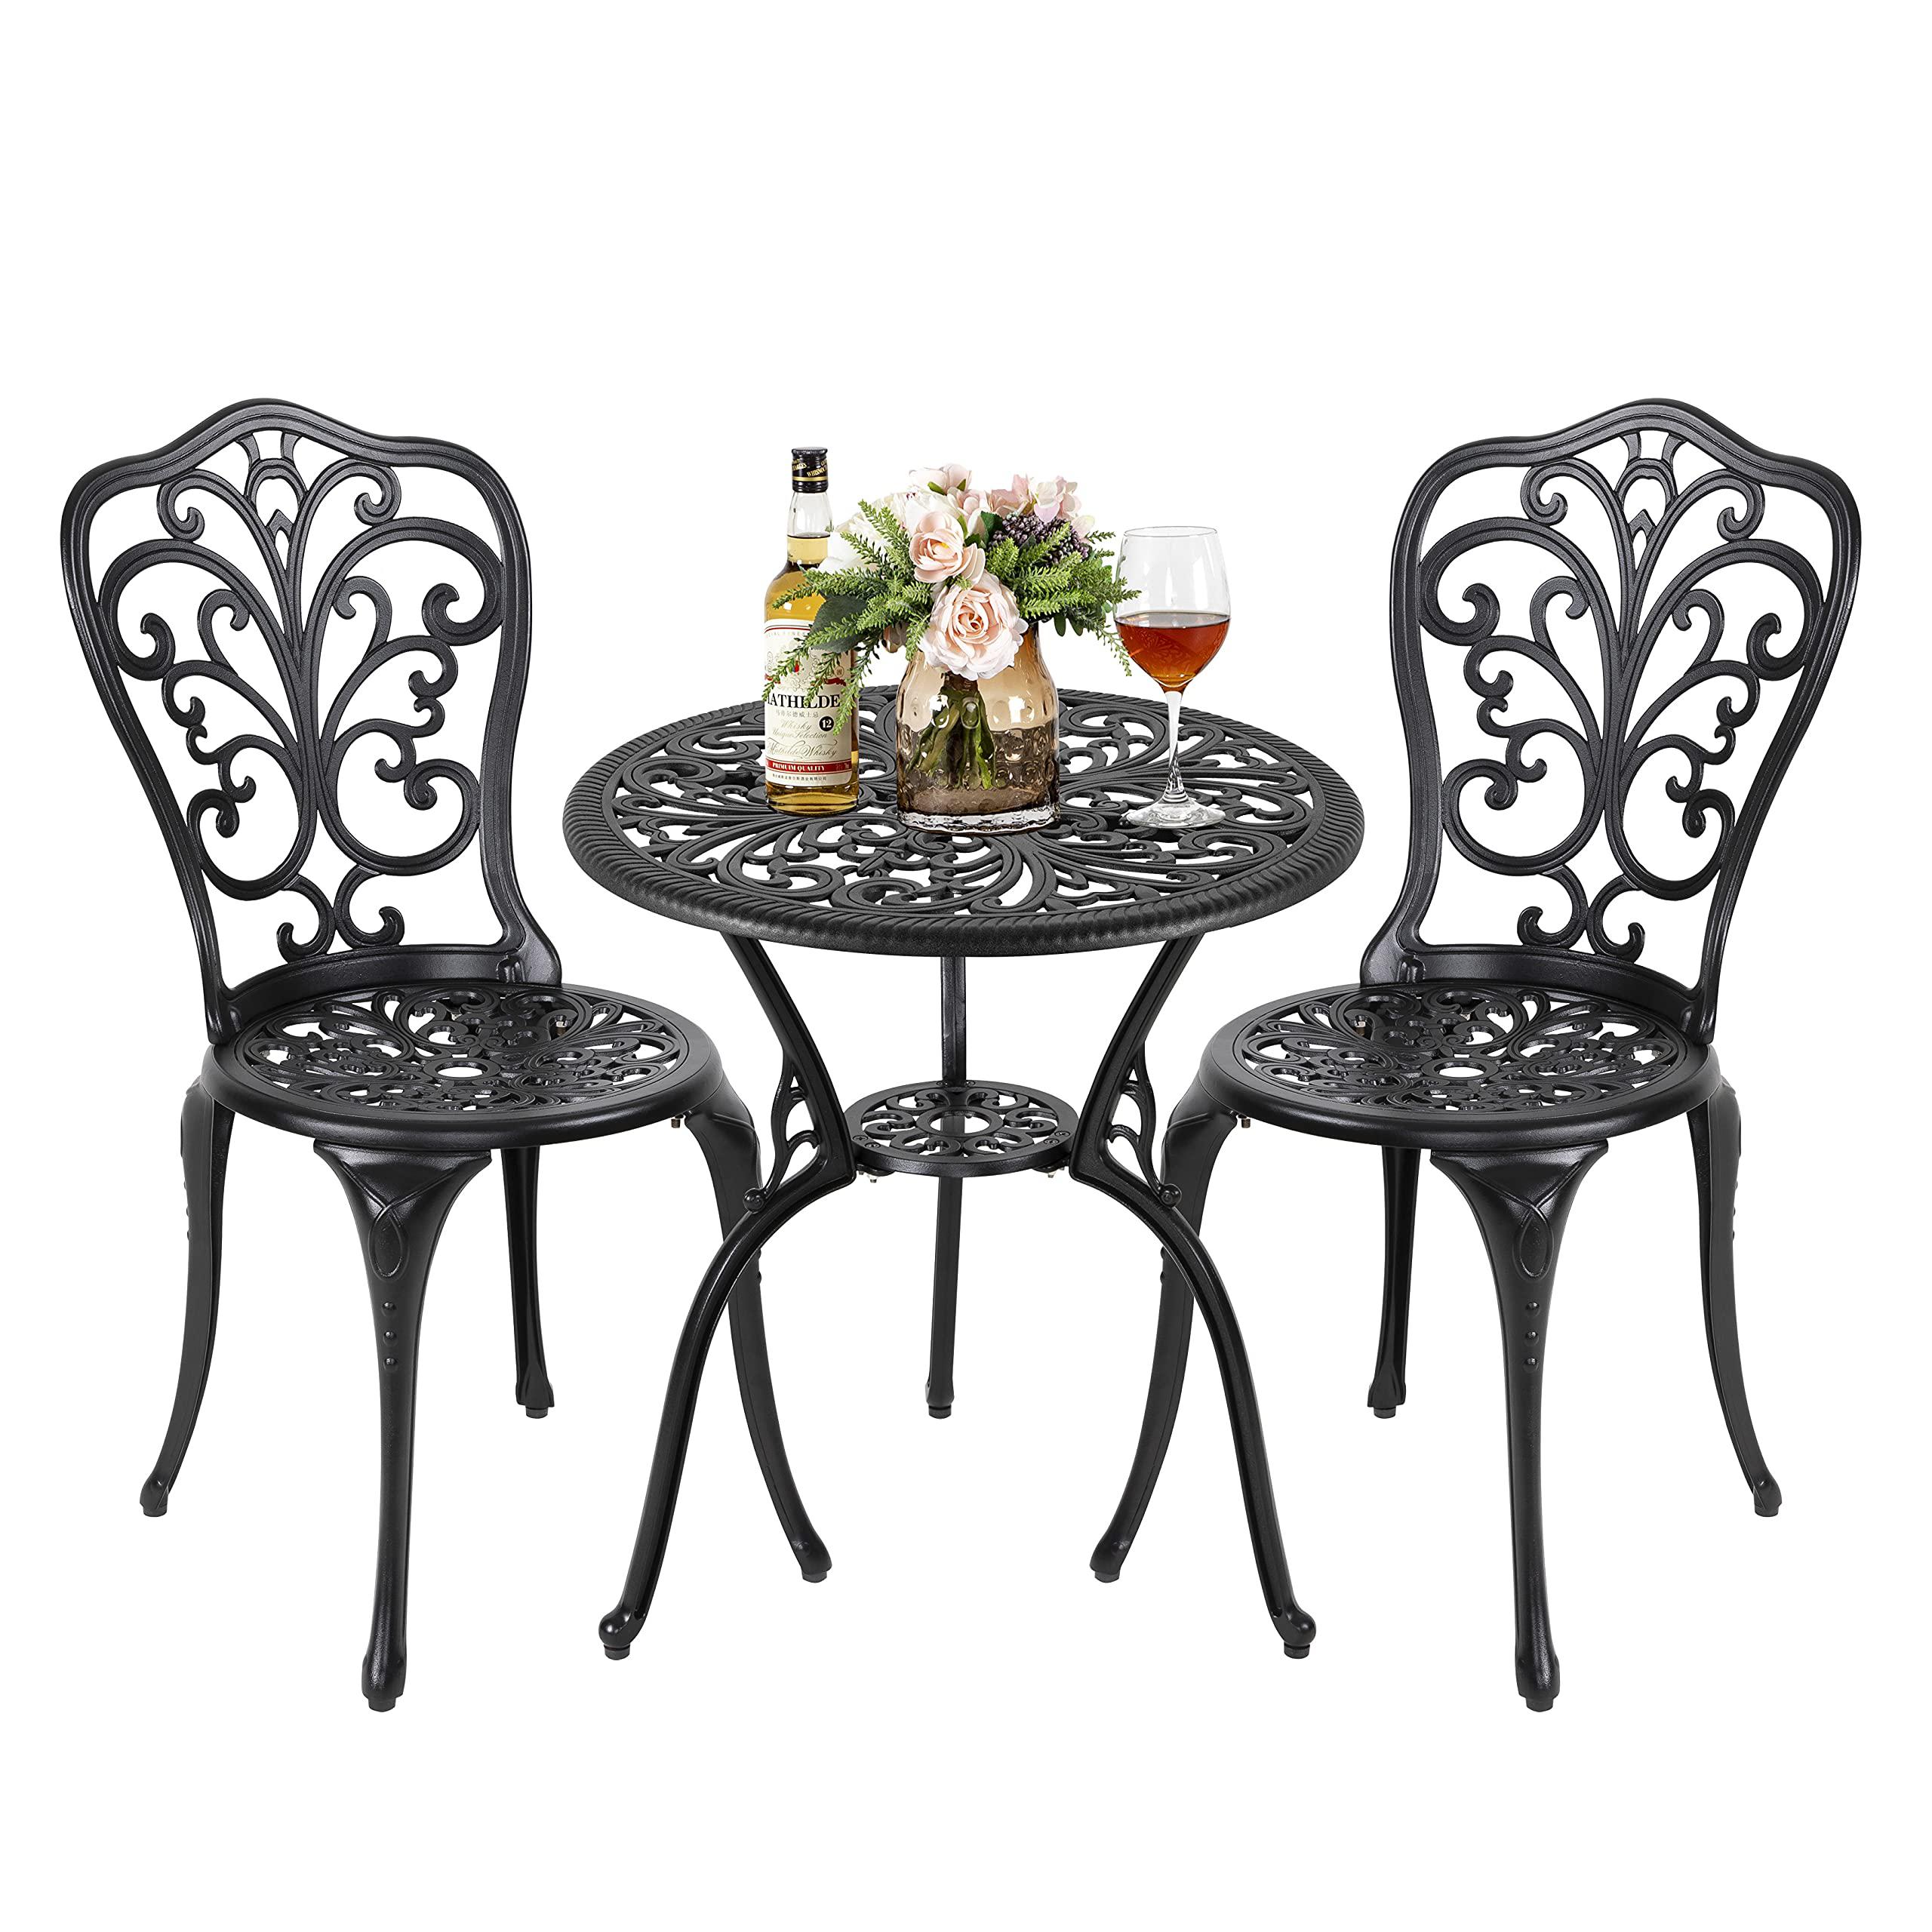 nuu garden 3 piece outdoor bistro table set, all weather aluminum table and chairs with umbrella hole for yard, balcony, blac